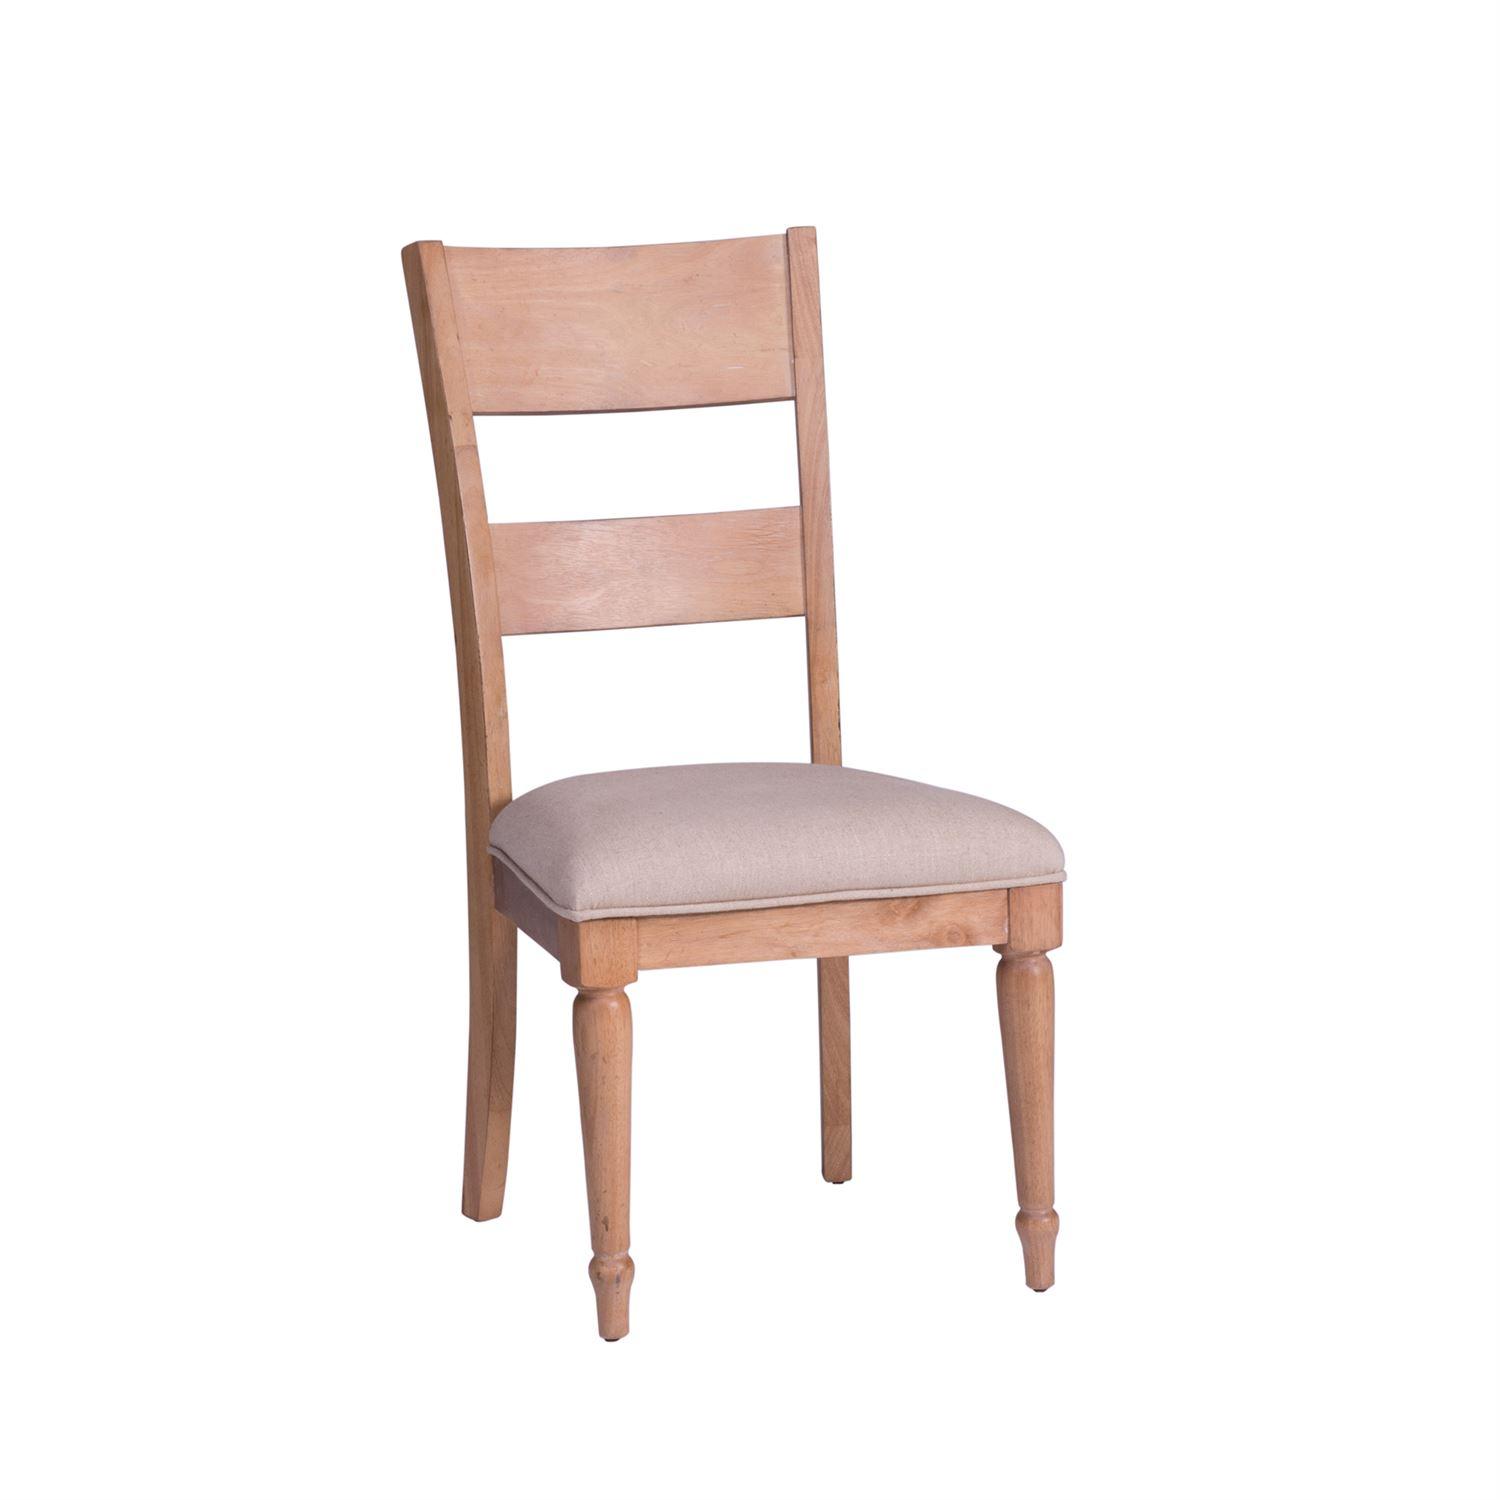 Contemporary Dining Side Chair Harbor View  (531-DR) Dining Side Chair 531-C1501 in Beige 